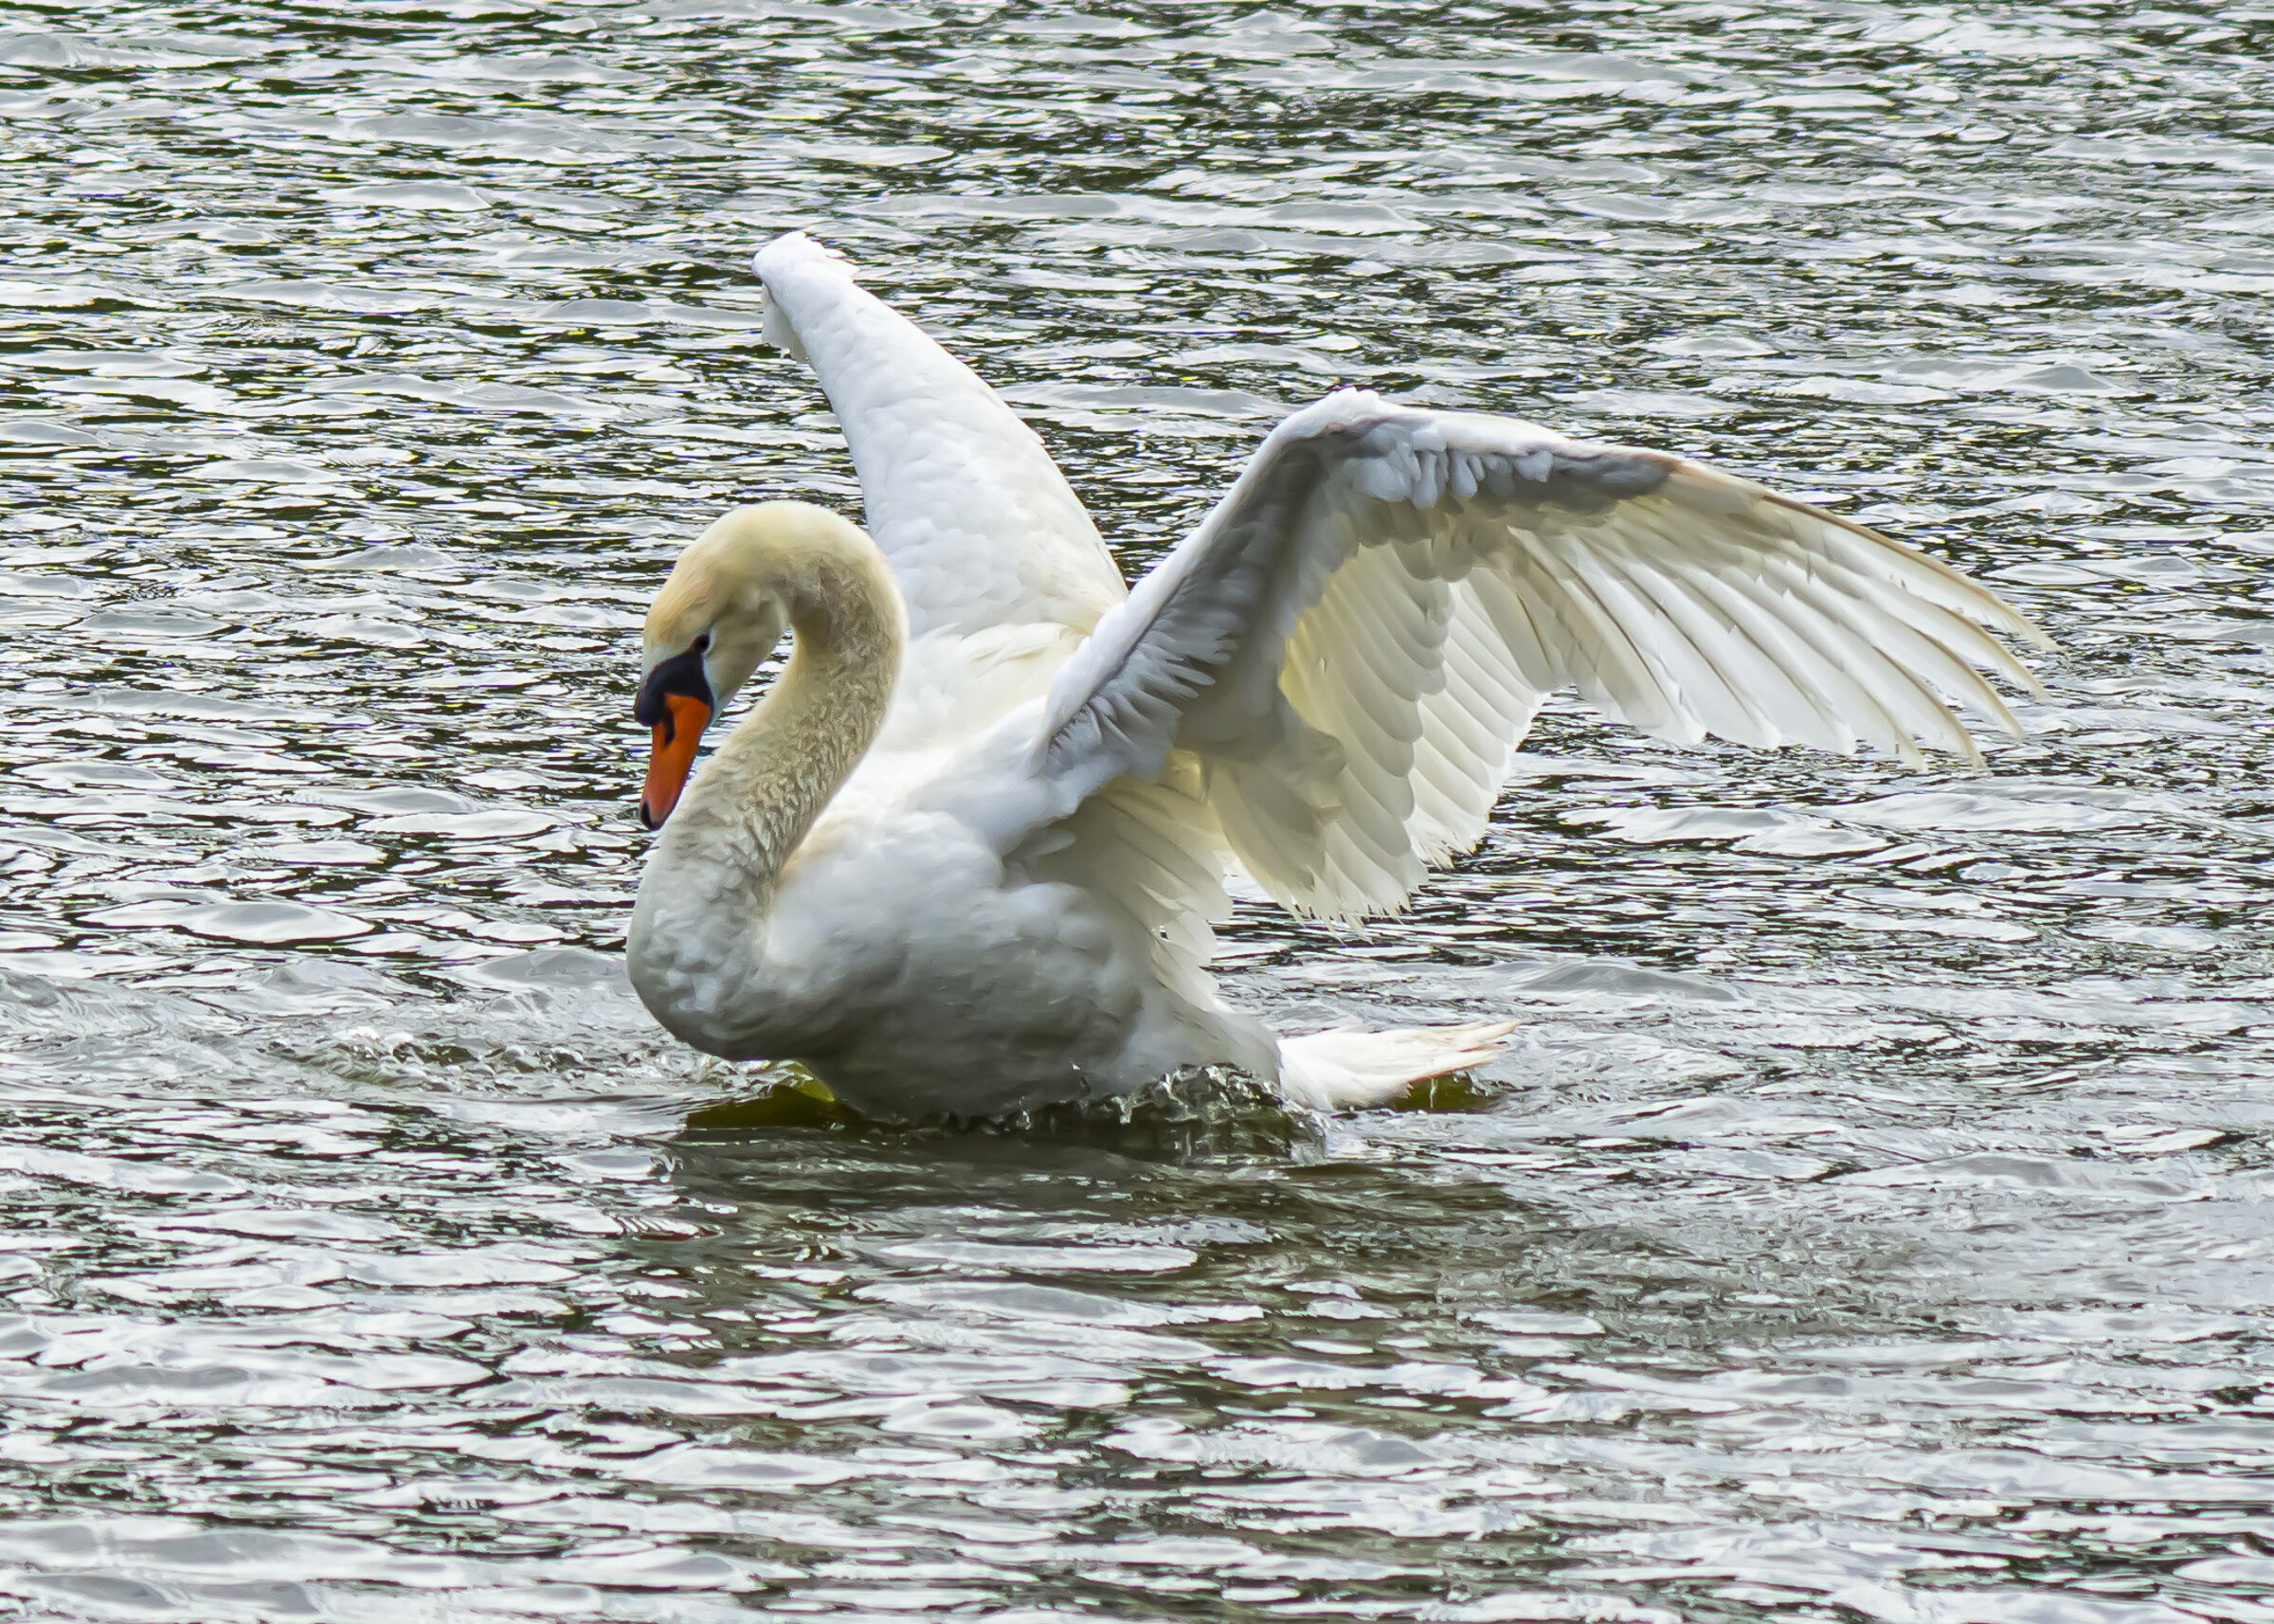 Cob Swan Stretching his Wings